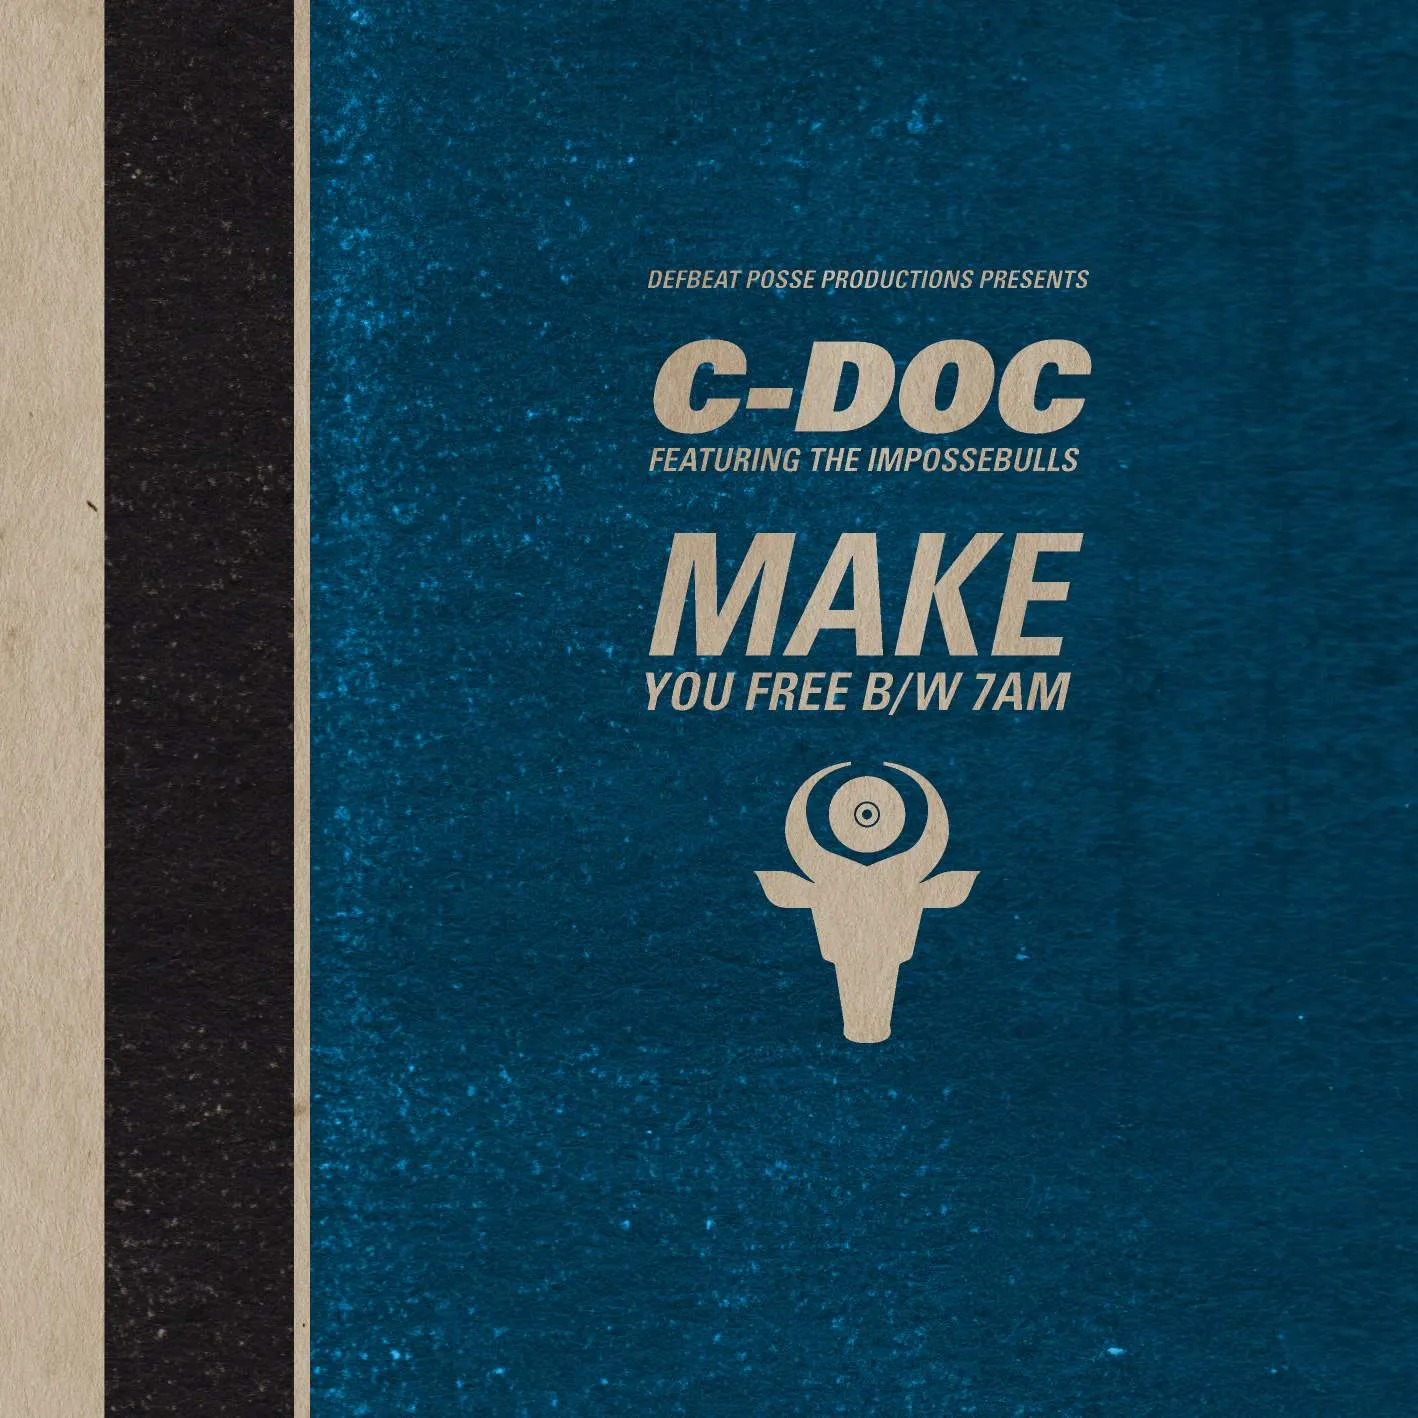 Album cover for “Make You Free b/w 7am” by C-Doc